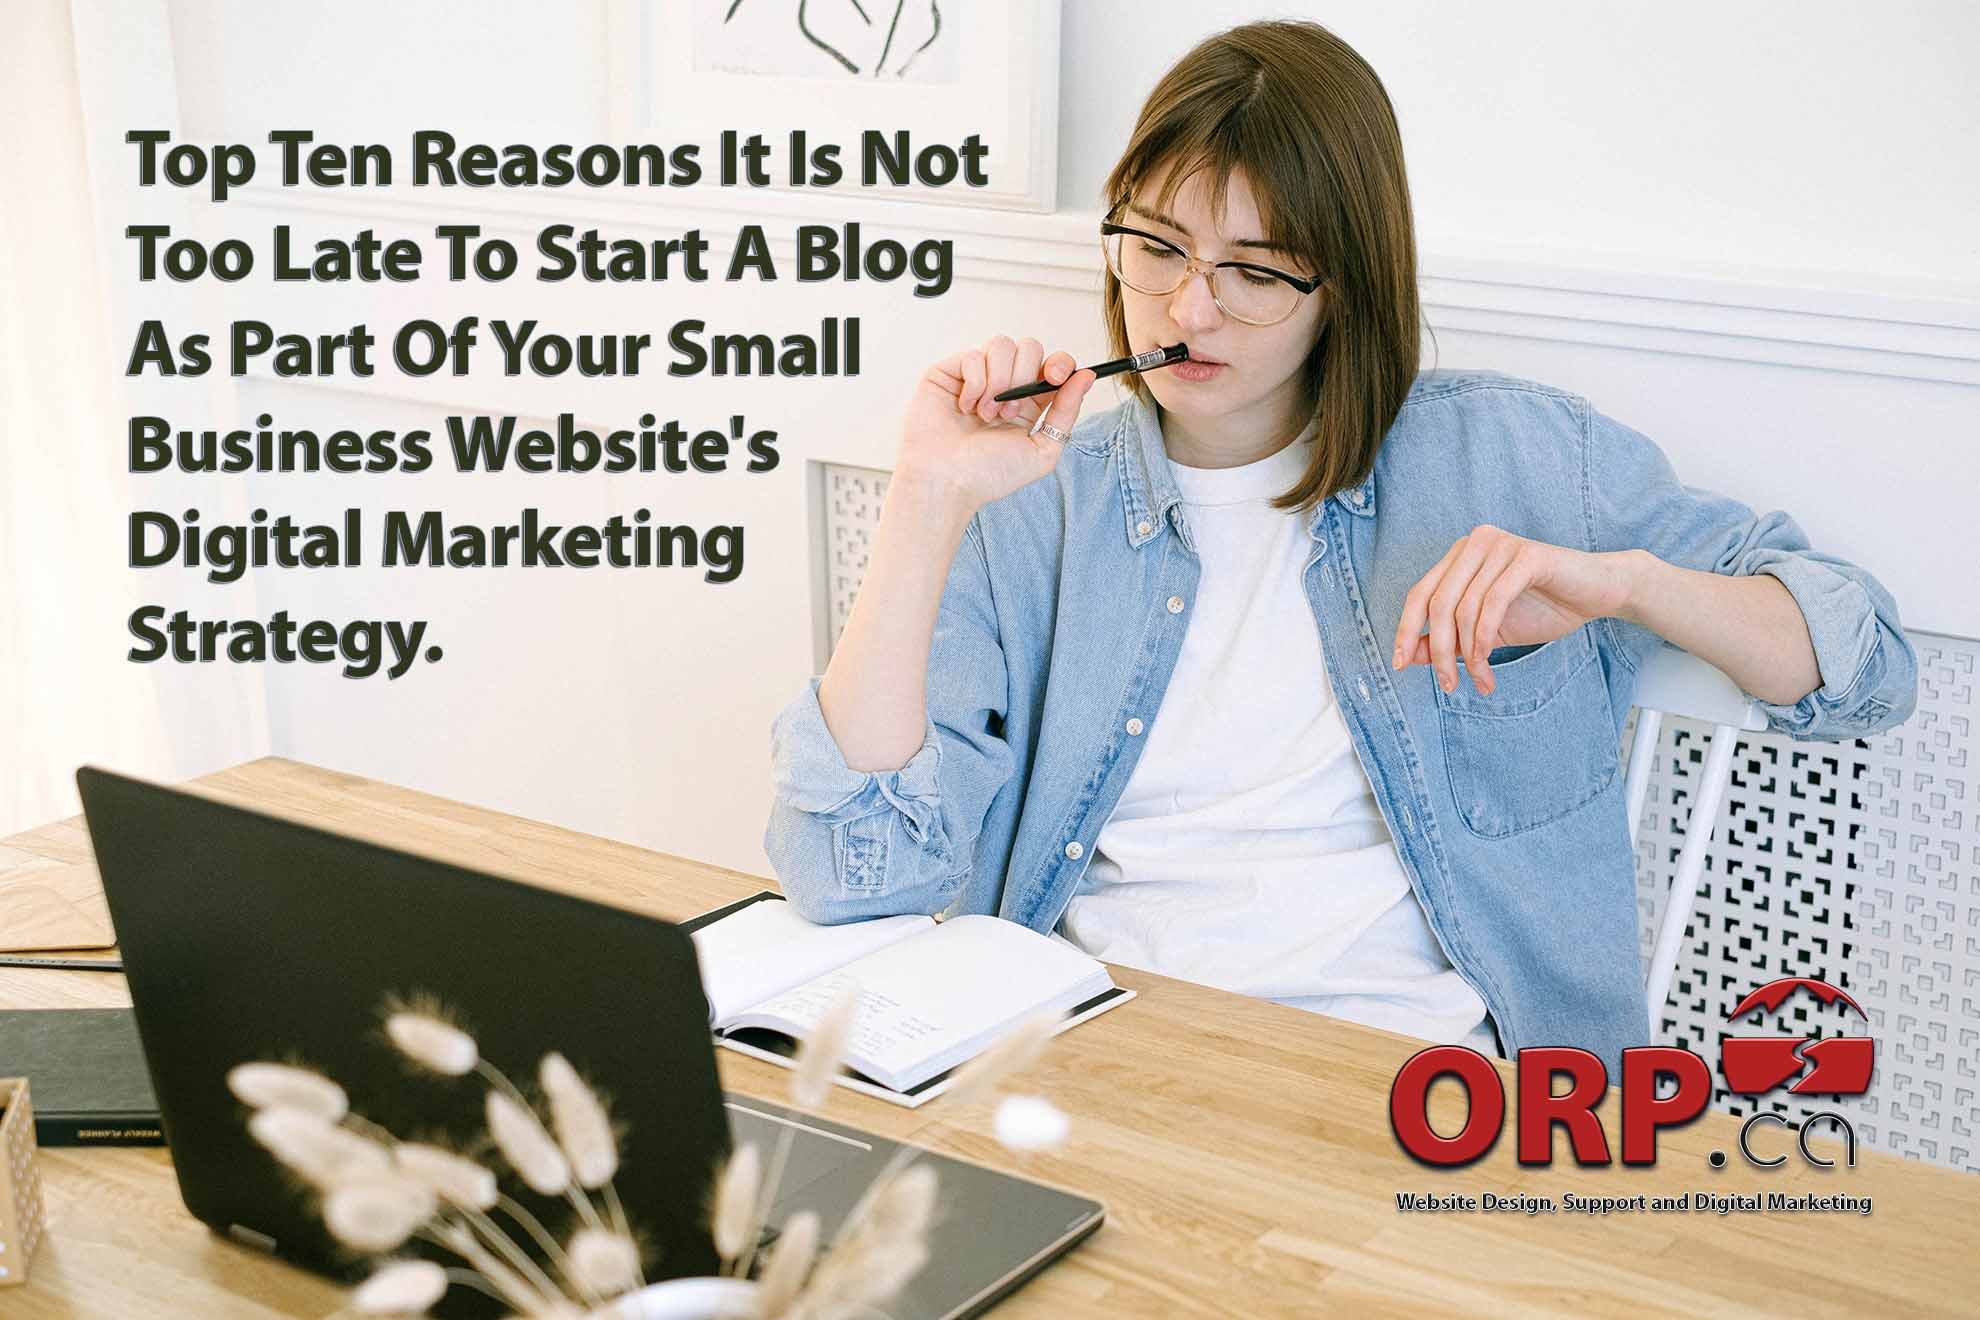 Top Ten Reasons It Is Not Too Late To Start A Blog As Part Of Your Small Business Websites Digital Marketing Strategy by ORP.ca Website and Digital Marketing Services for Small Businesses and Business Professionals